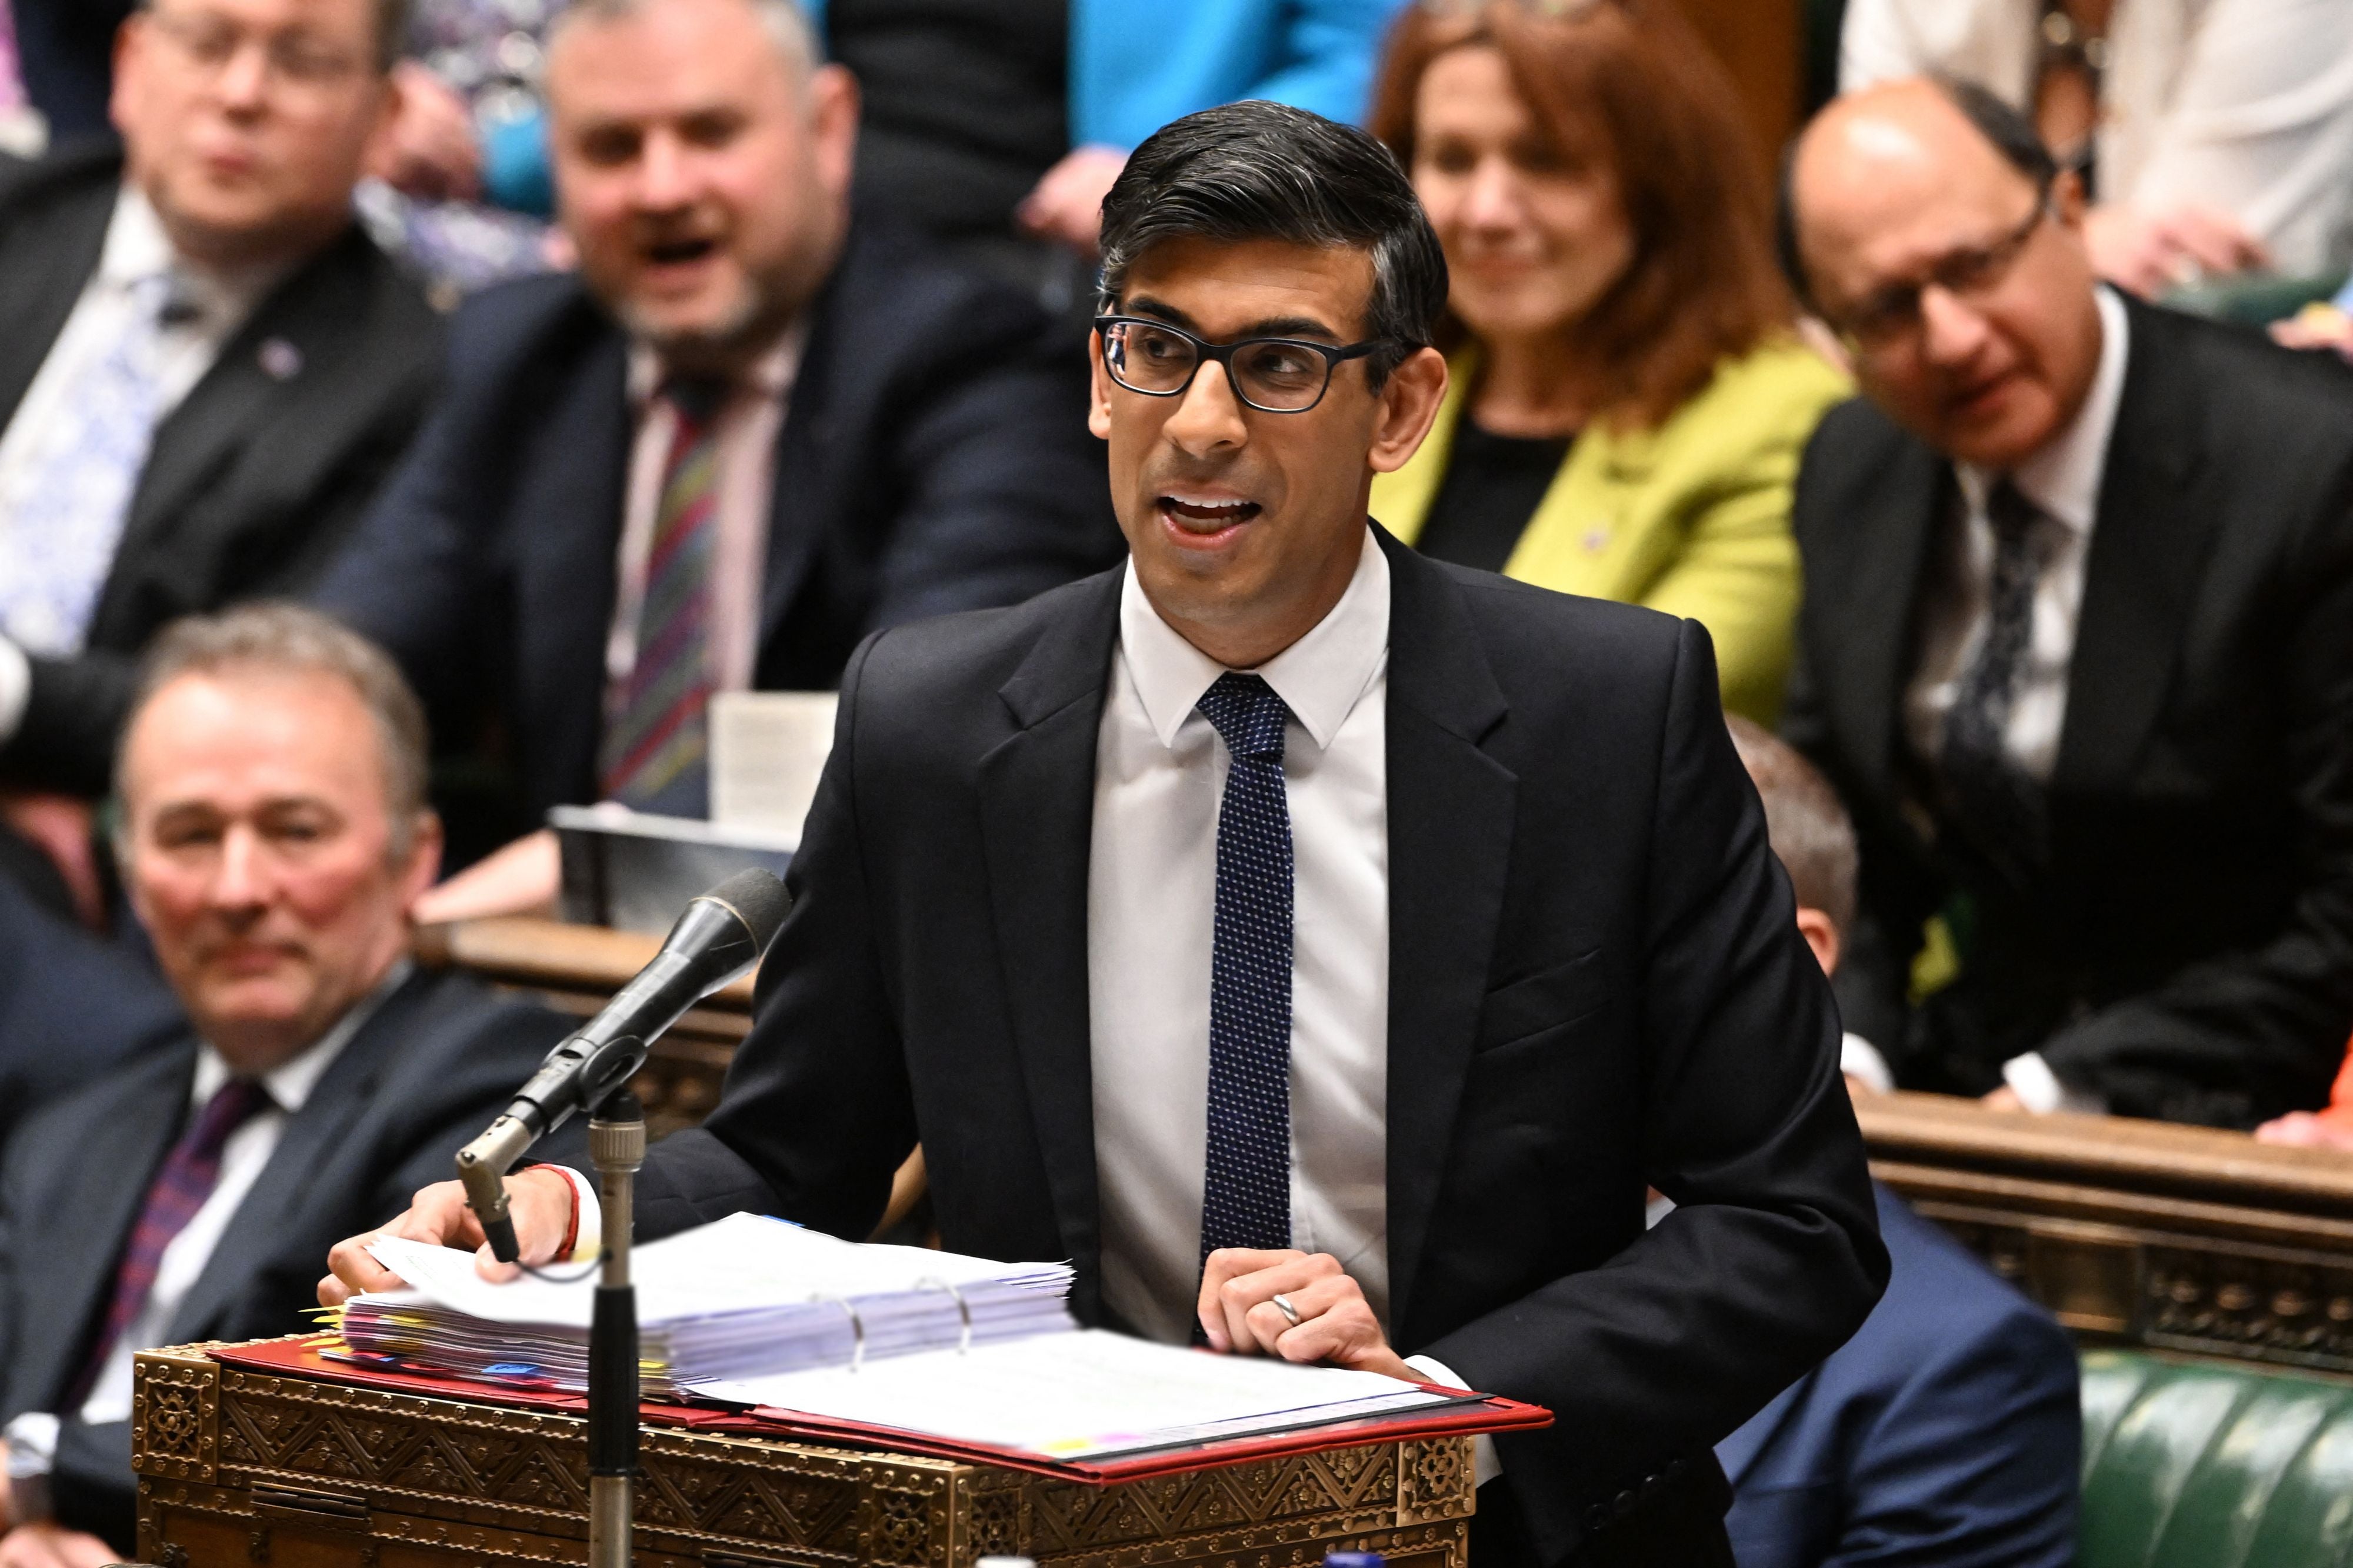 Rishi Sunak appears intent on all but abolishing the right to claim asylum